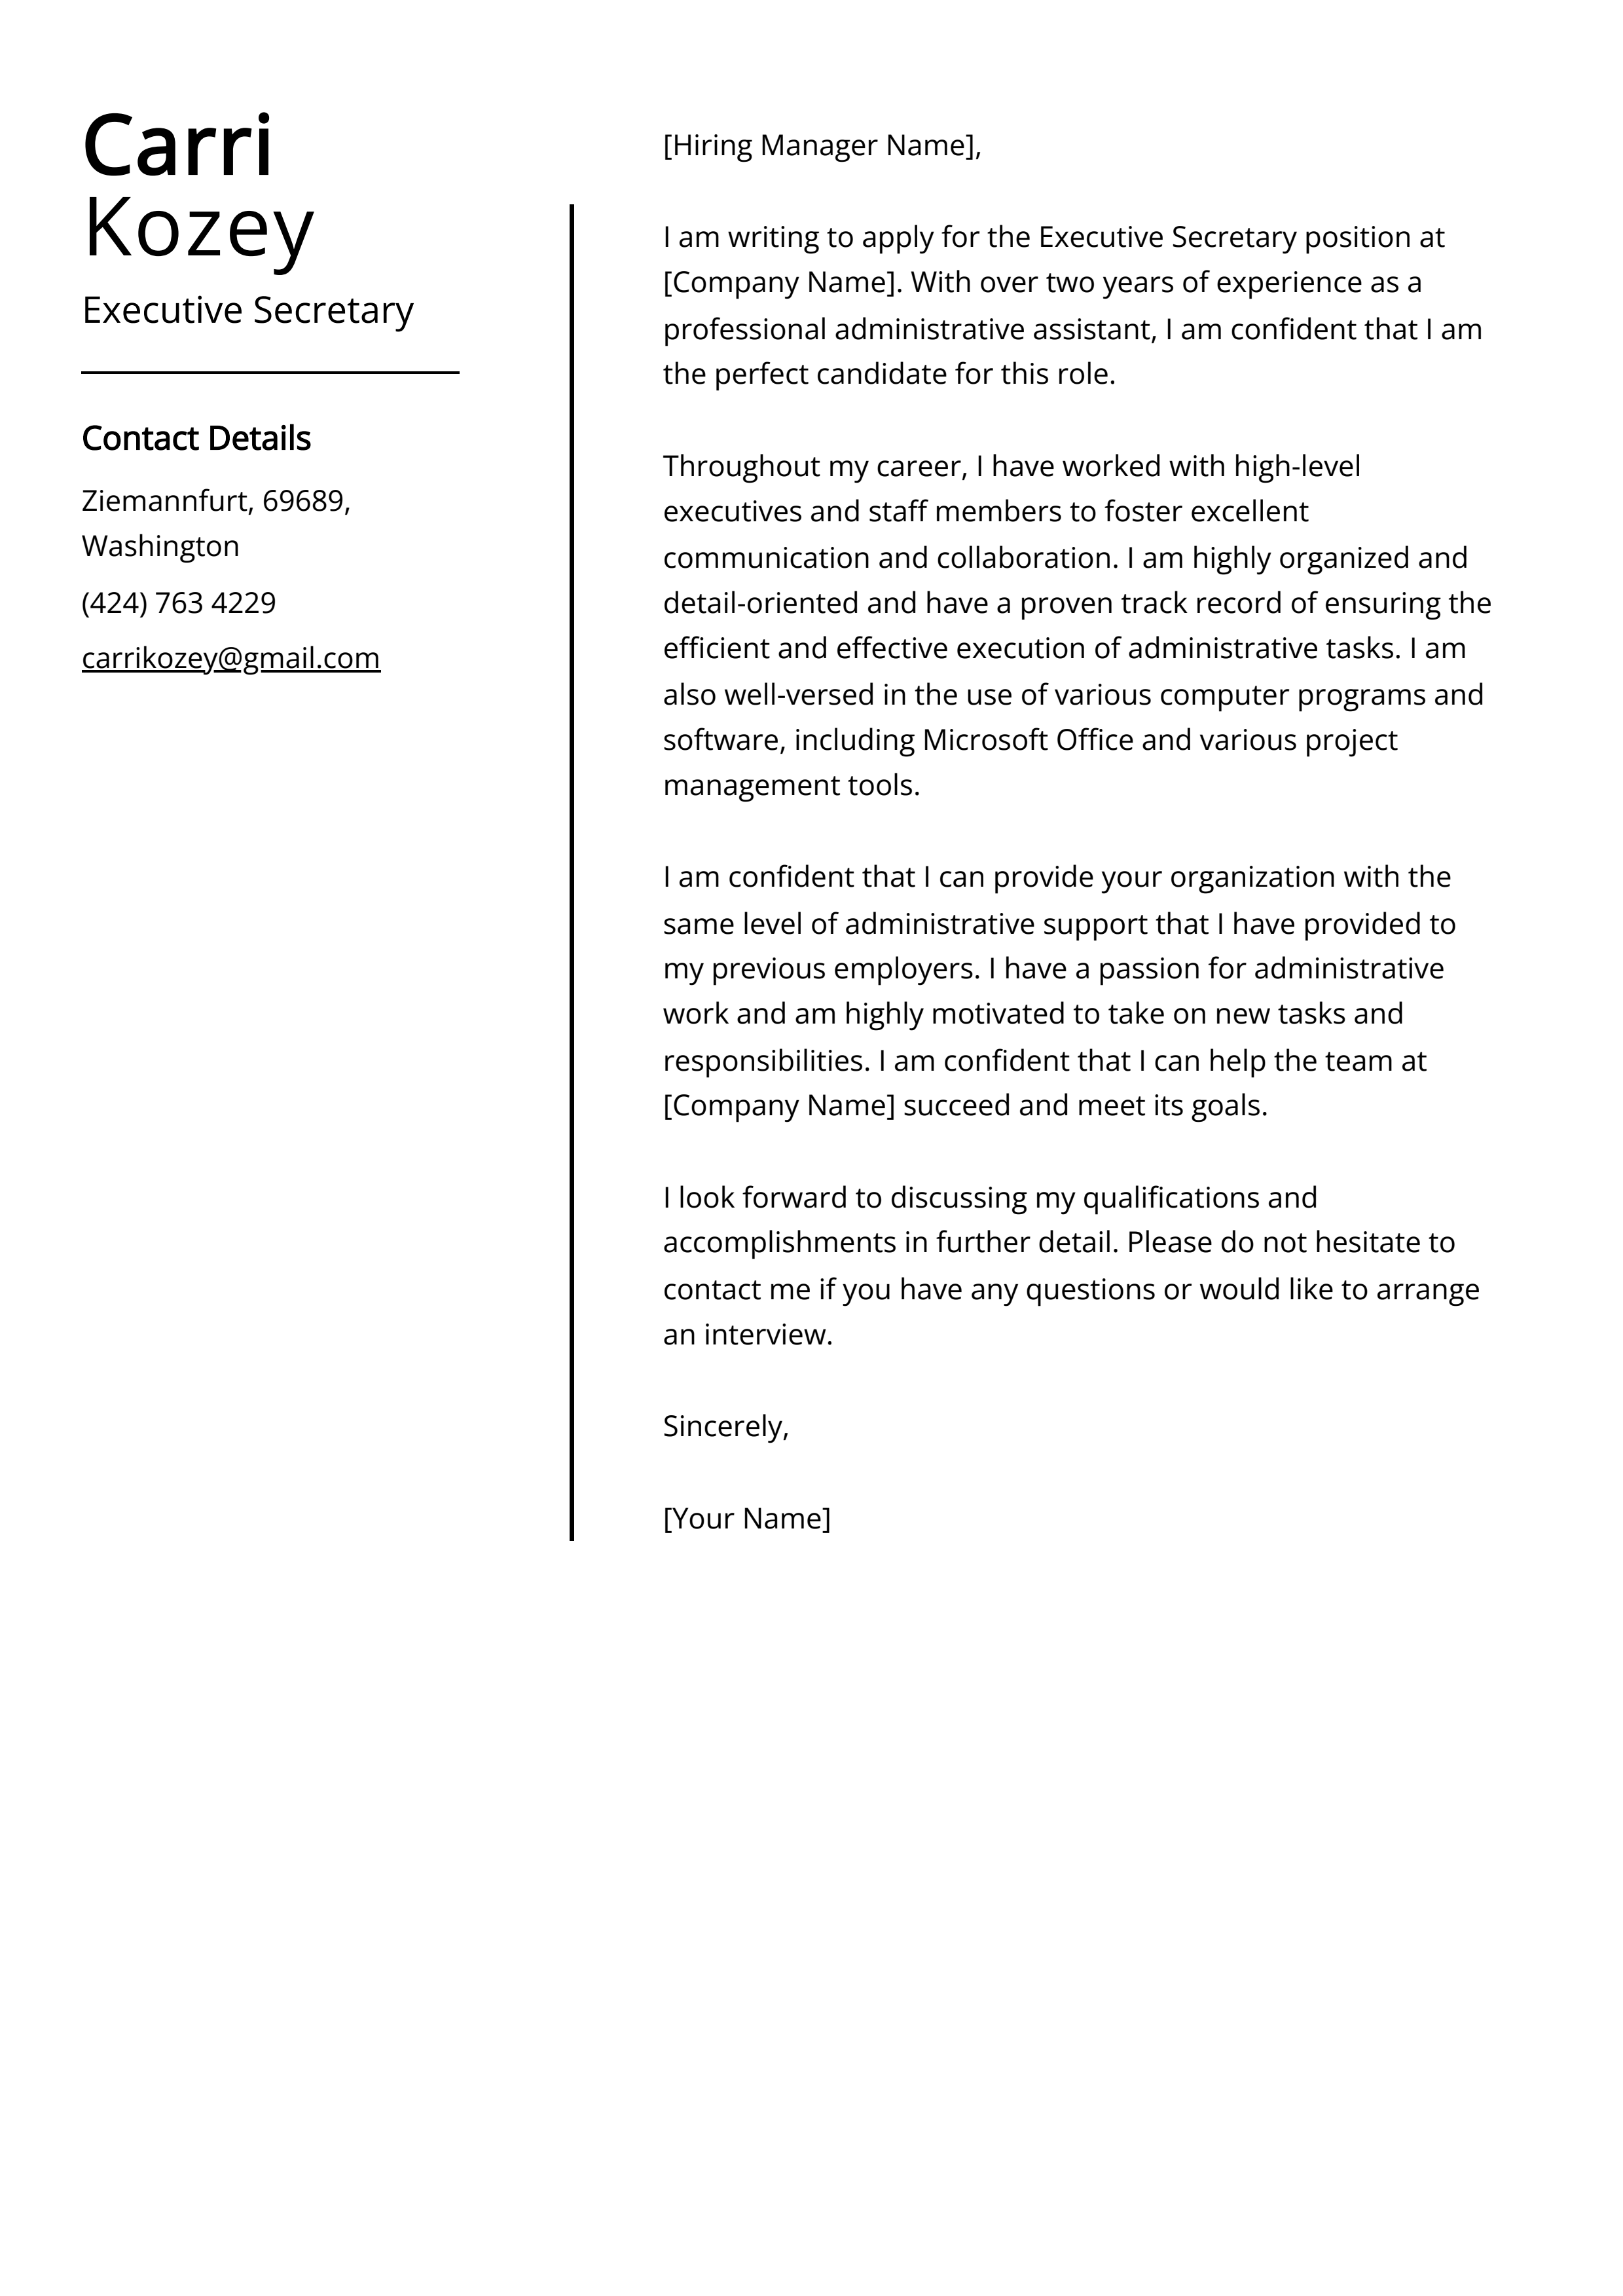 Executive Secretary Cover Letter Example